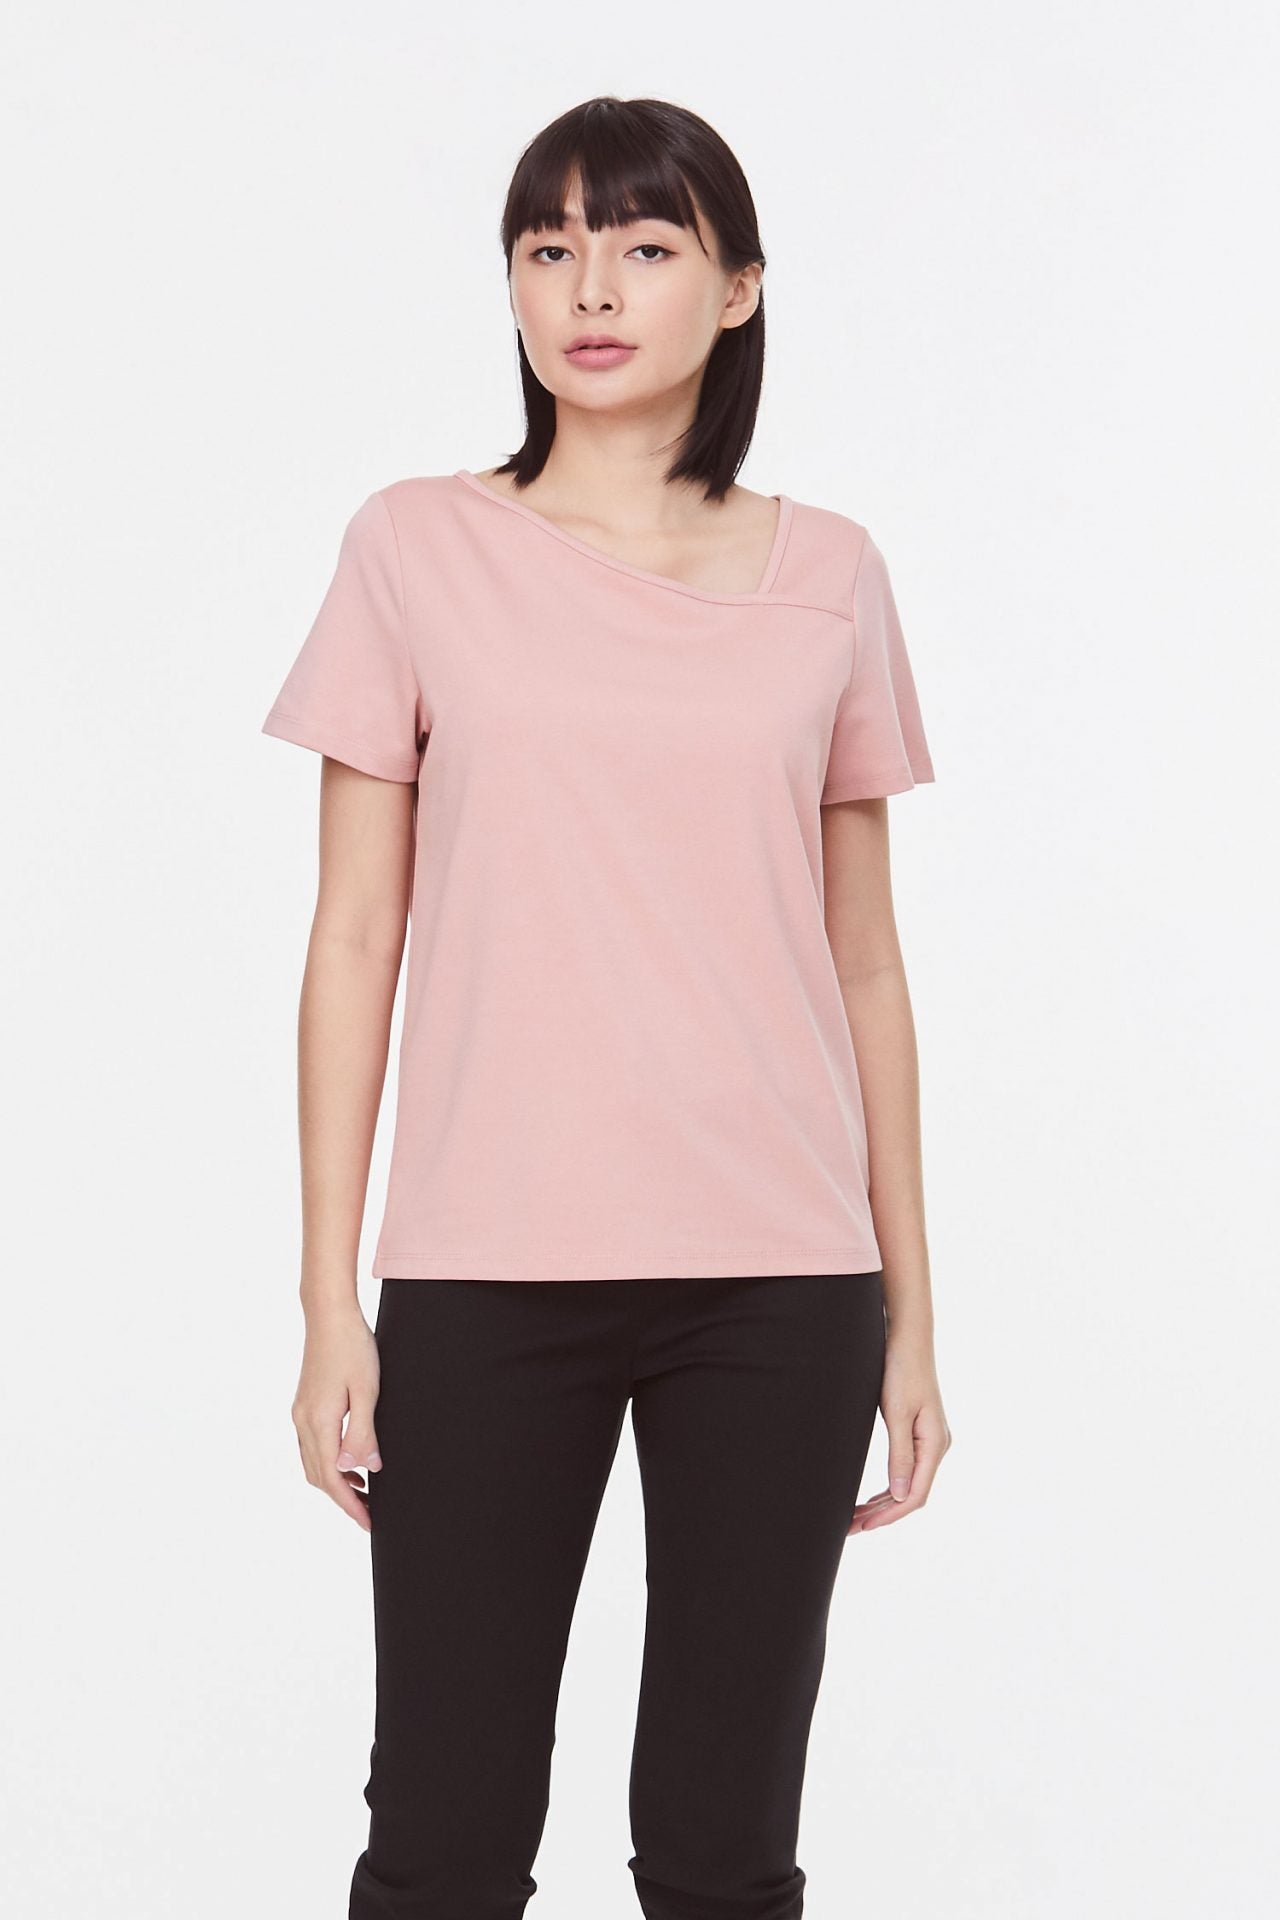 AT 8574 DIAGONALED NECKLINED TEE PEACH